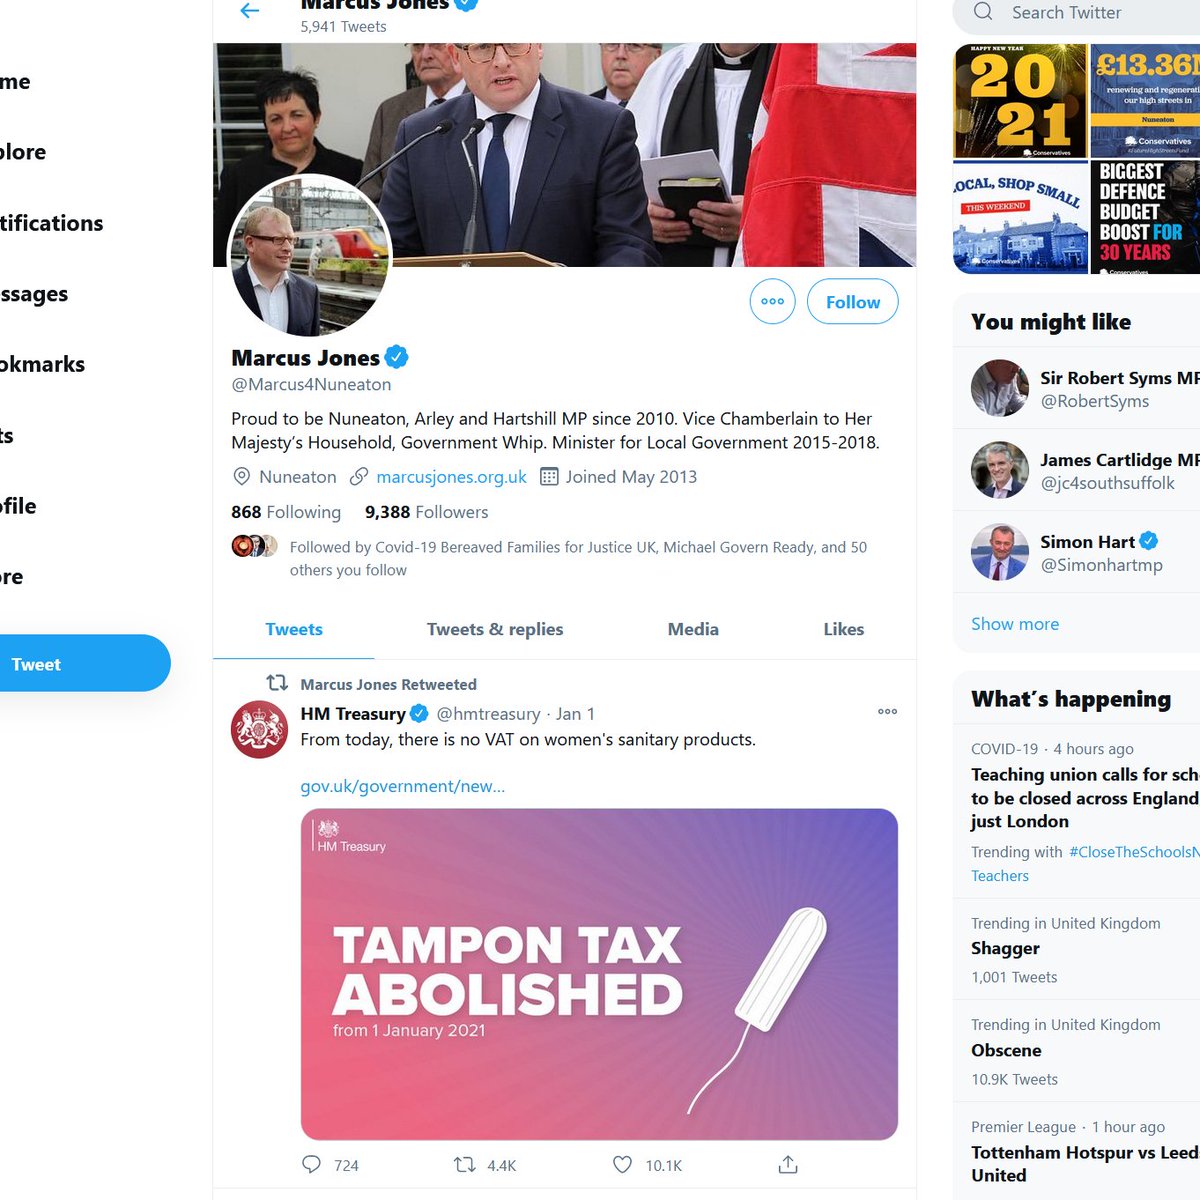 Marcus Jones, Conservative MP for Nuneaton, has retweeted the Treasury tweet. I doubt he would want people to know he voted against the motion to abolish the Tampon tax in 2015.